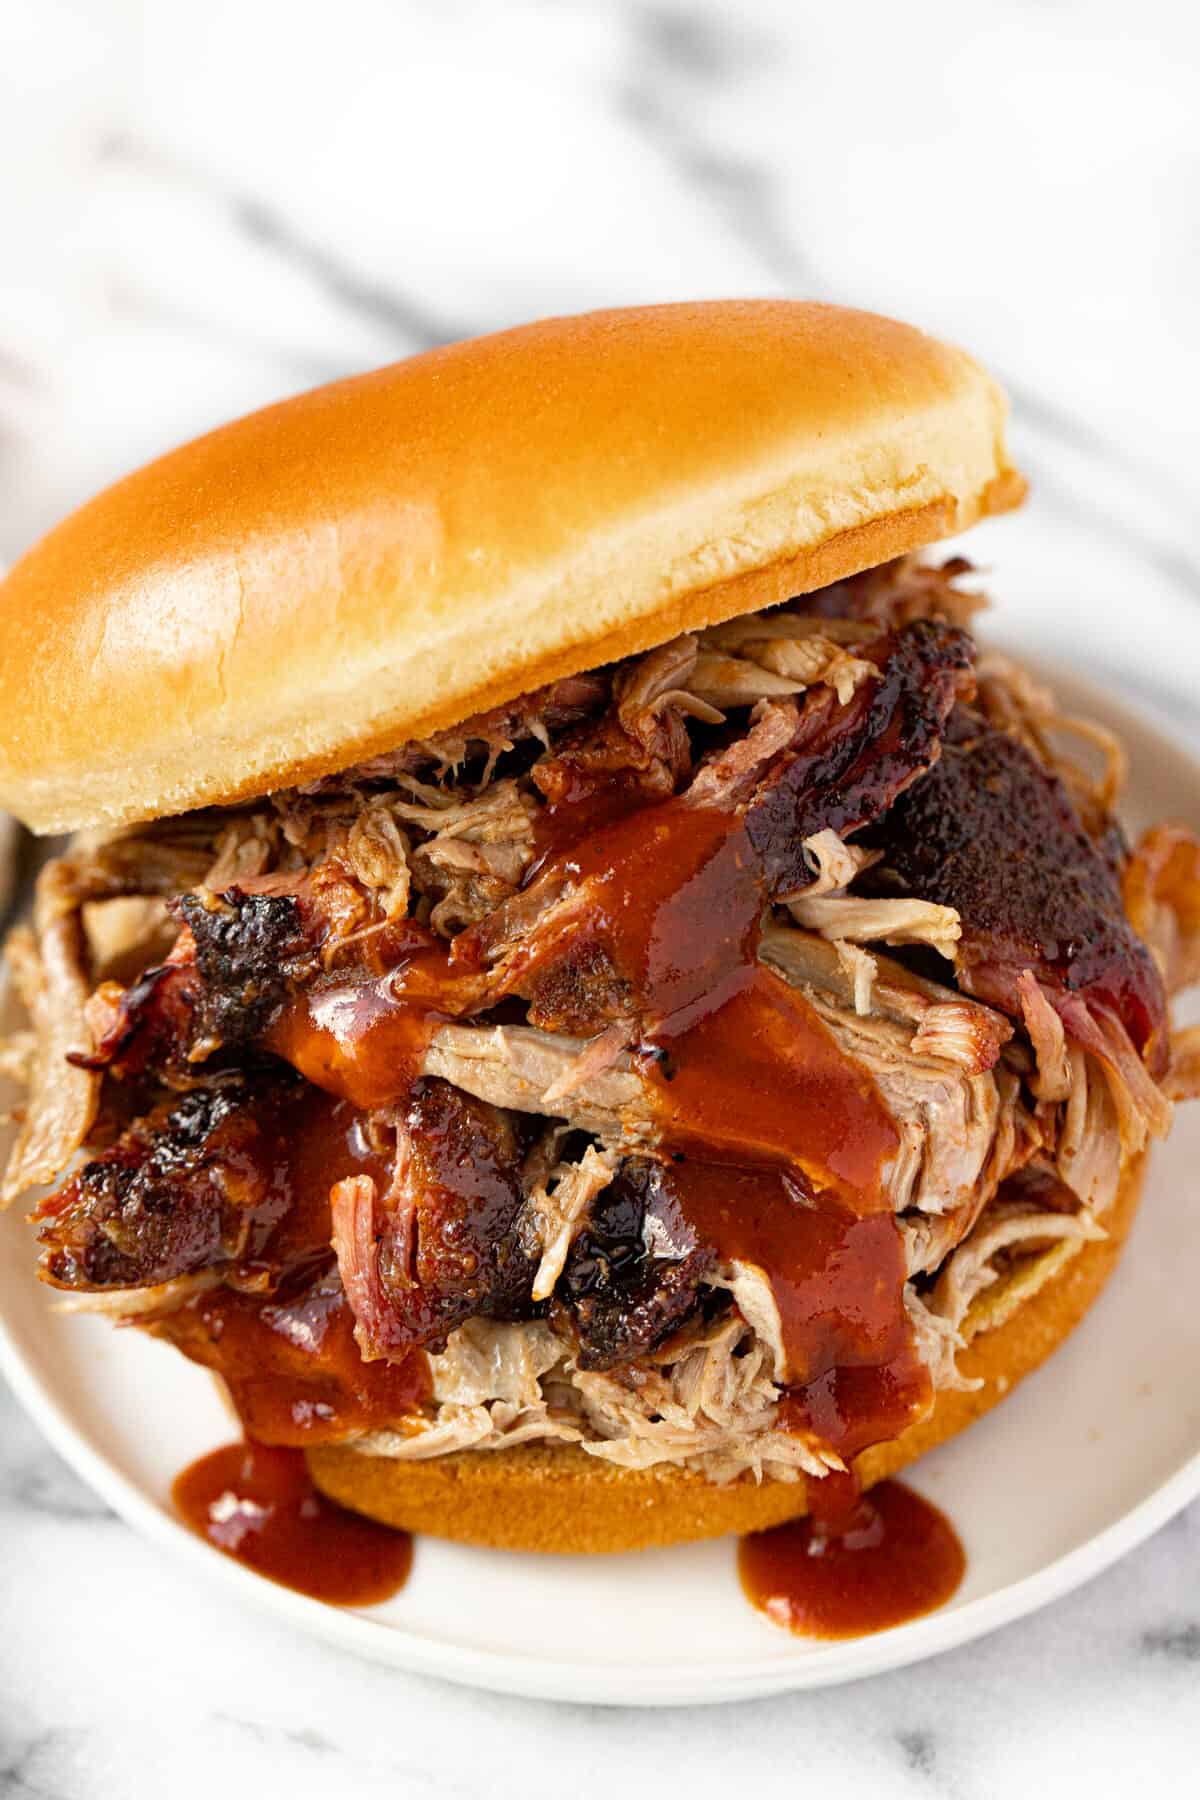 BBQ pulled pork sandwich with barbecue sauce.